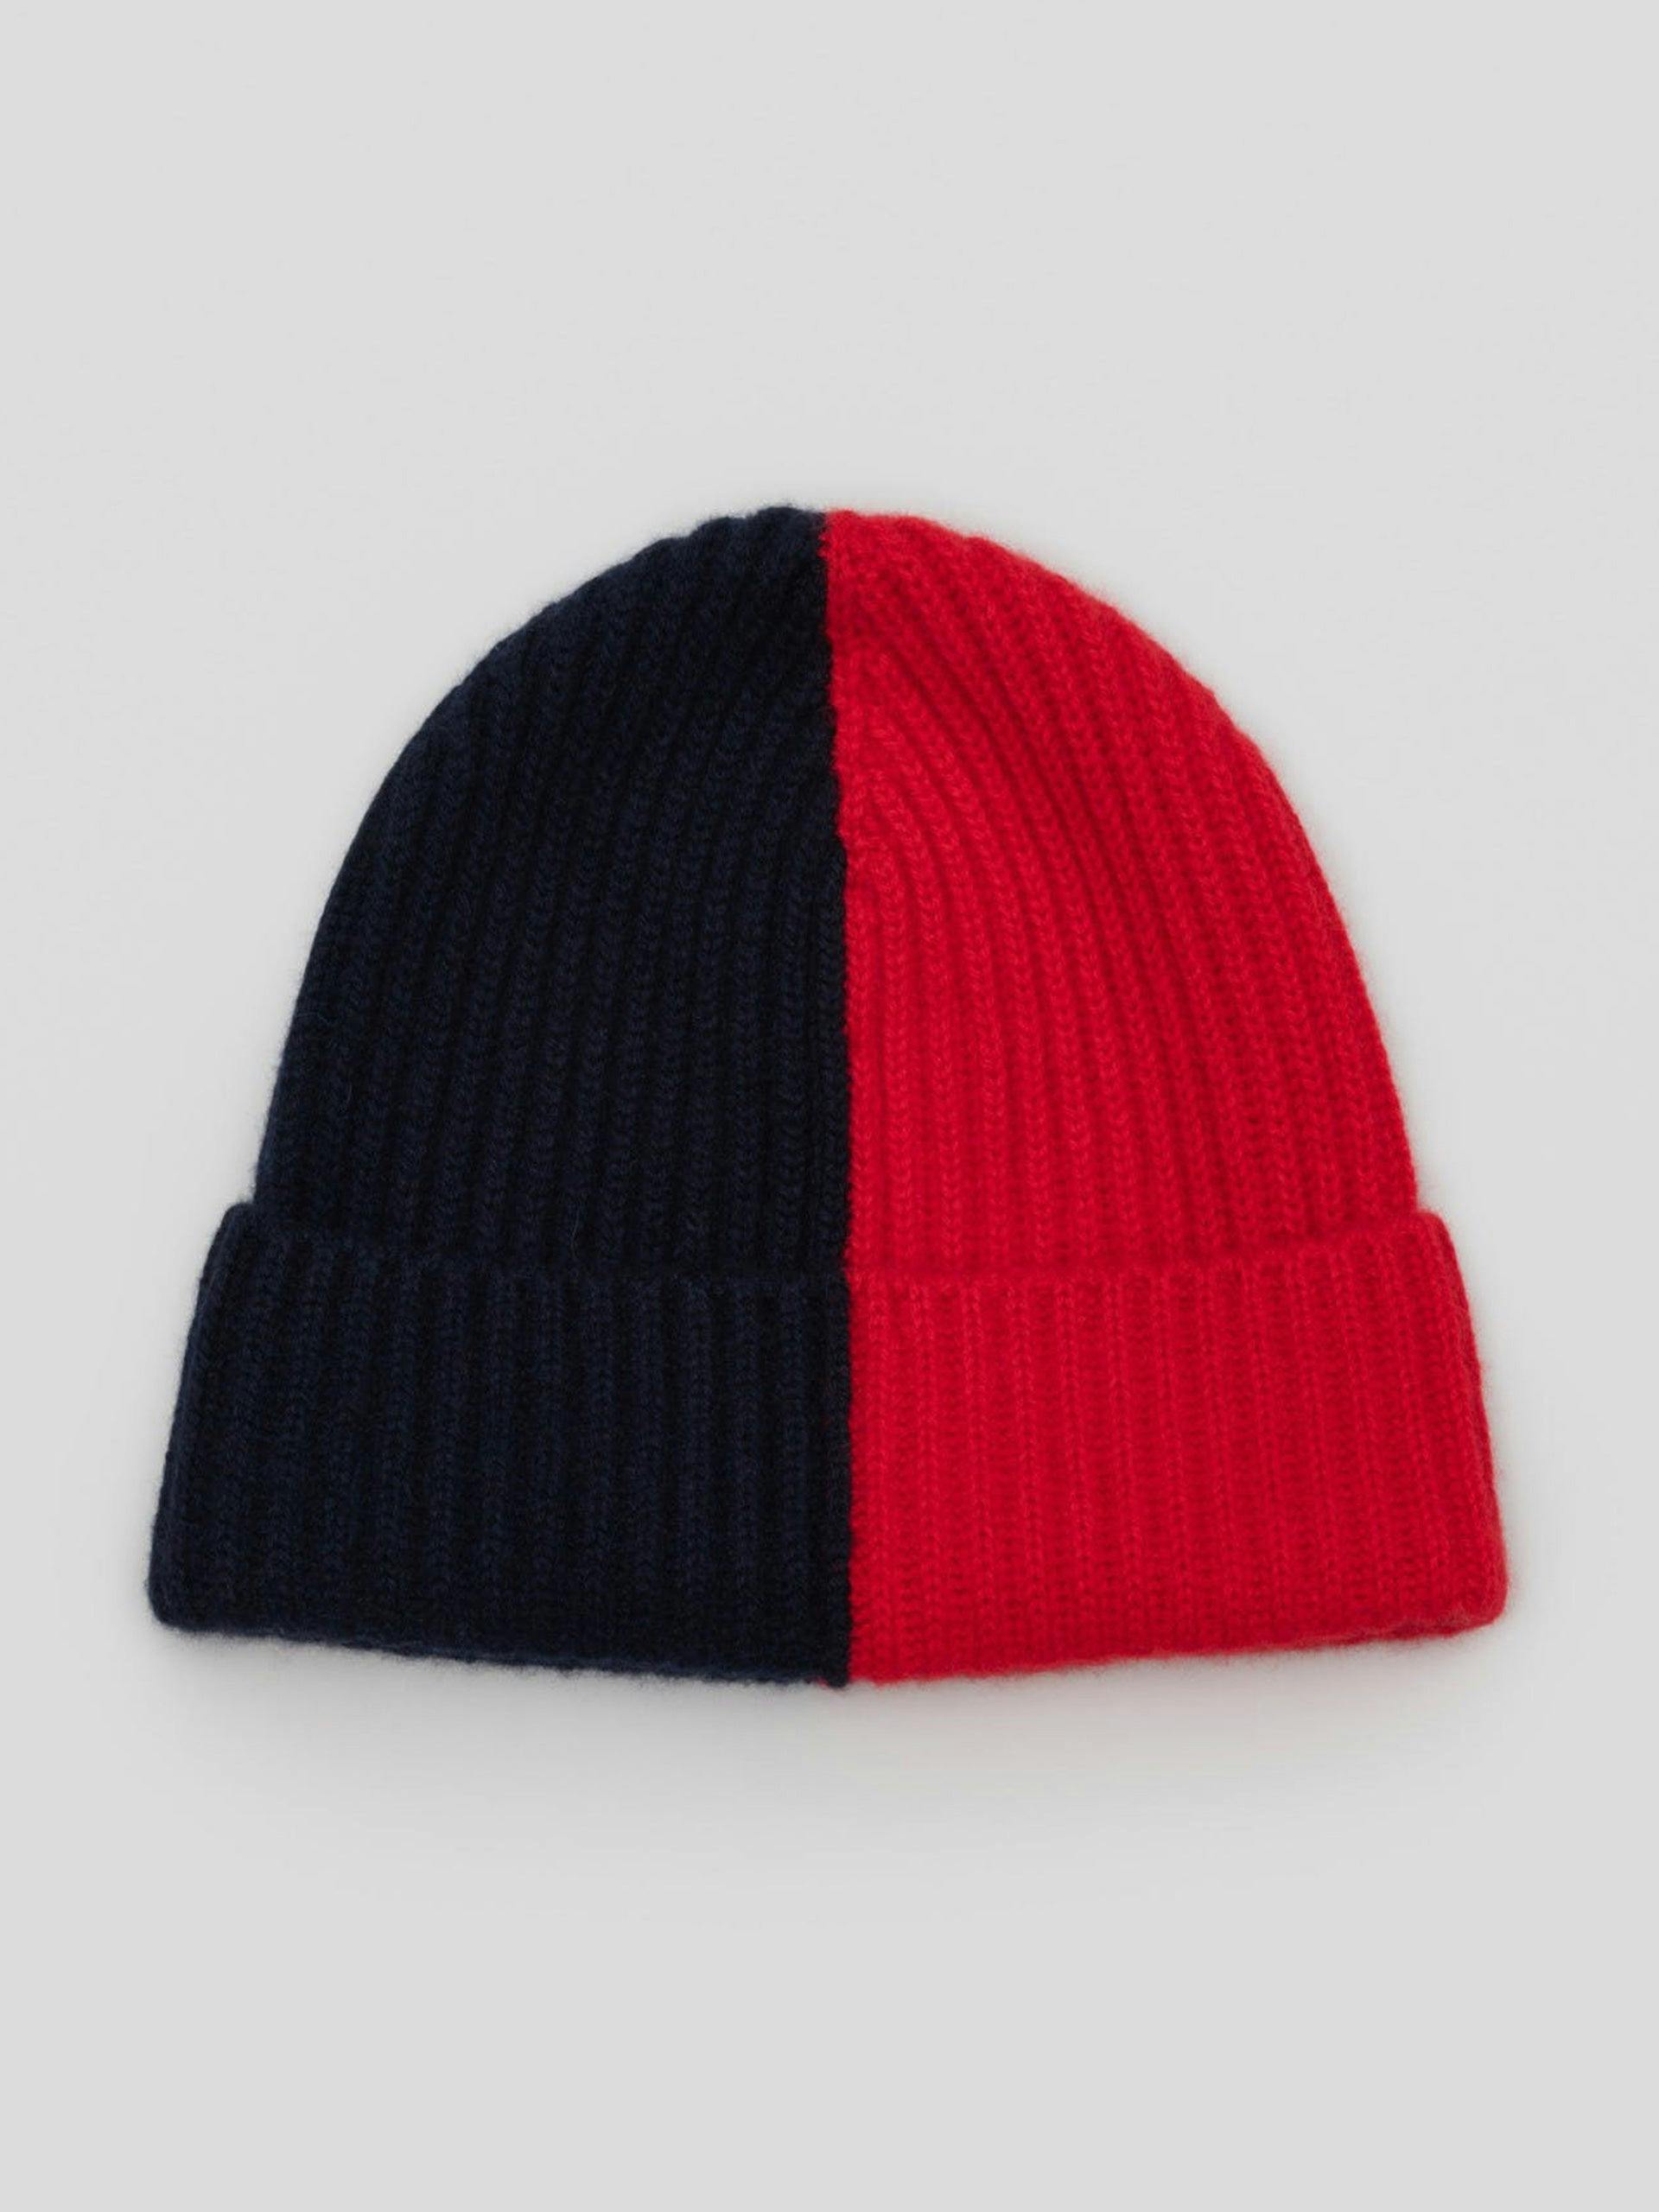 Two-colored beanie hat